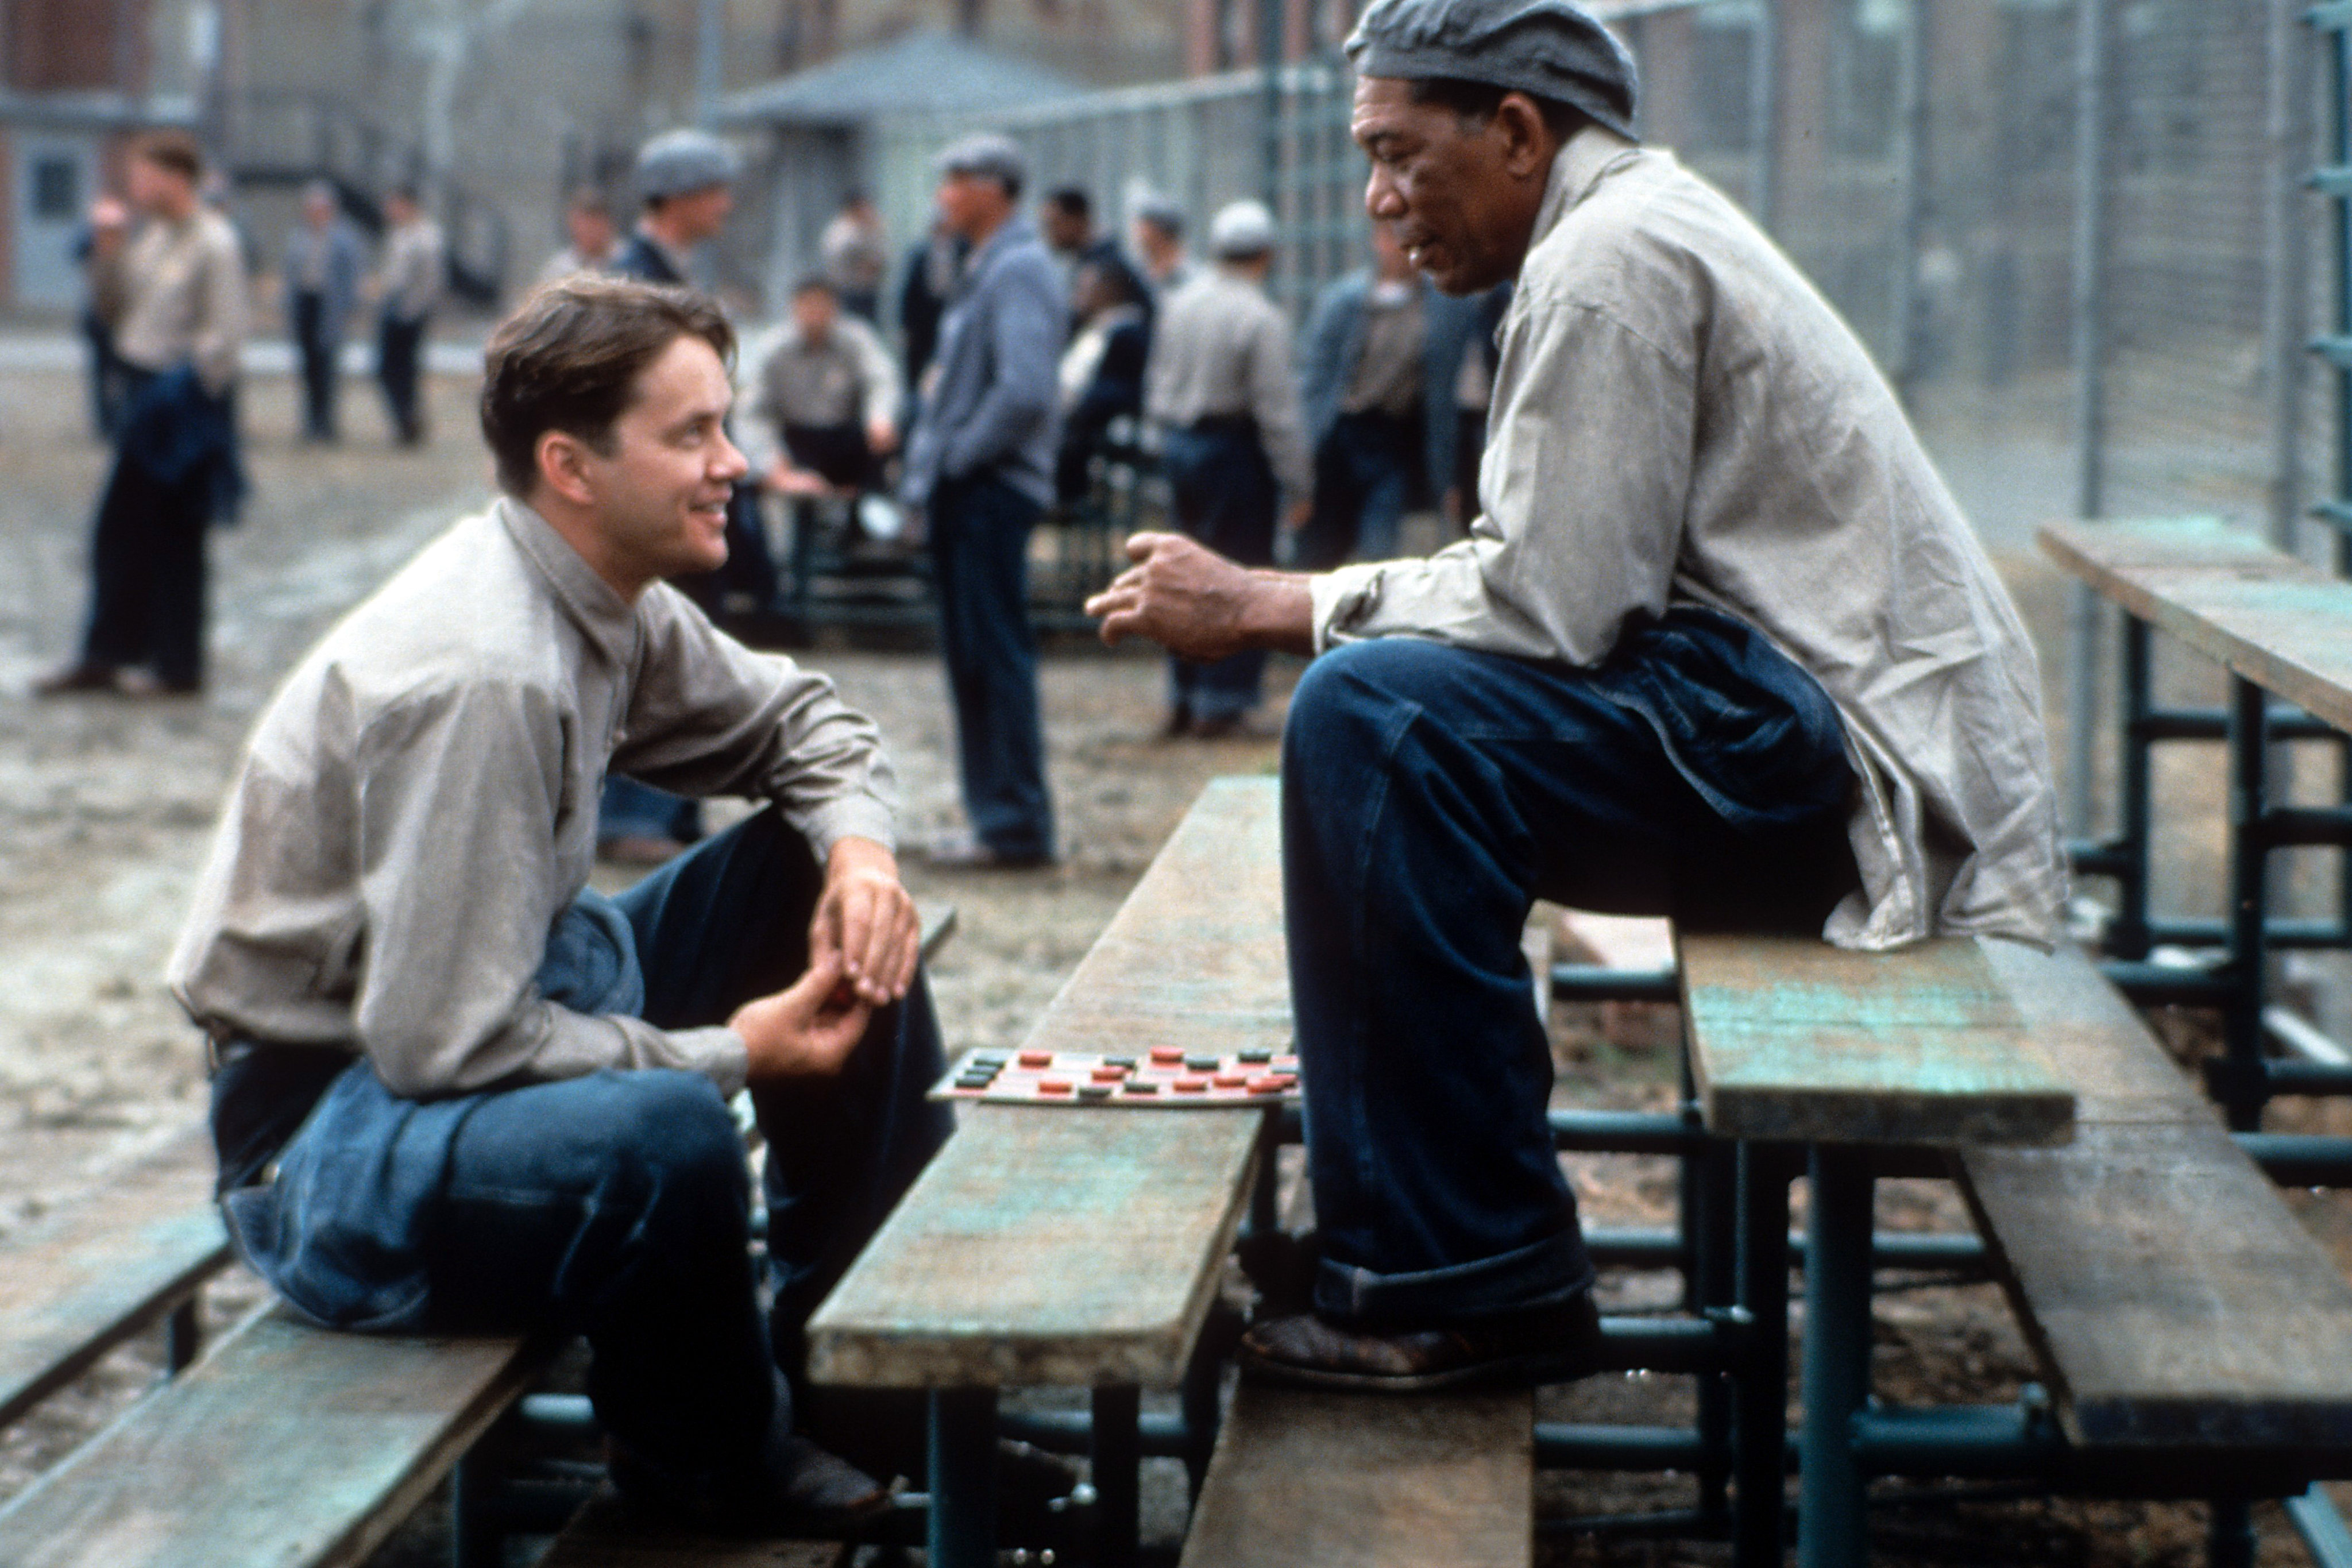 Tim Robbins and Morgan Freeman in a scene from The Shawshank Redemption. Watching the film inspires Elizabeth Chu, the young chairwoman of family-owned ZS Hospitality, which runs restaurants in Hong Kong, to be patient and hopeful, she tells Richard Lord. Photo: Castle Rock Entertainment/Getty Images